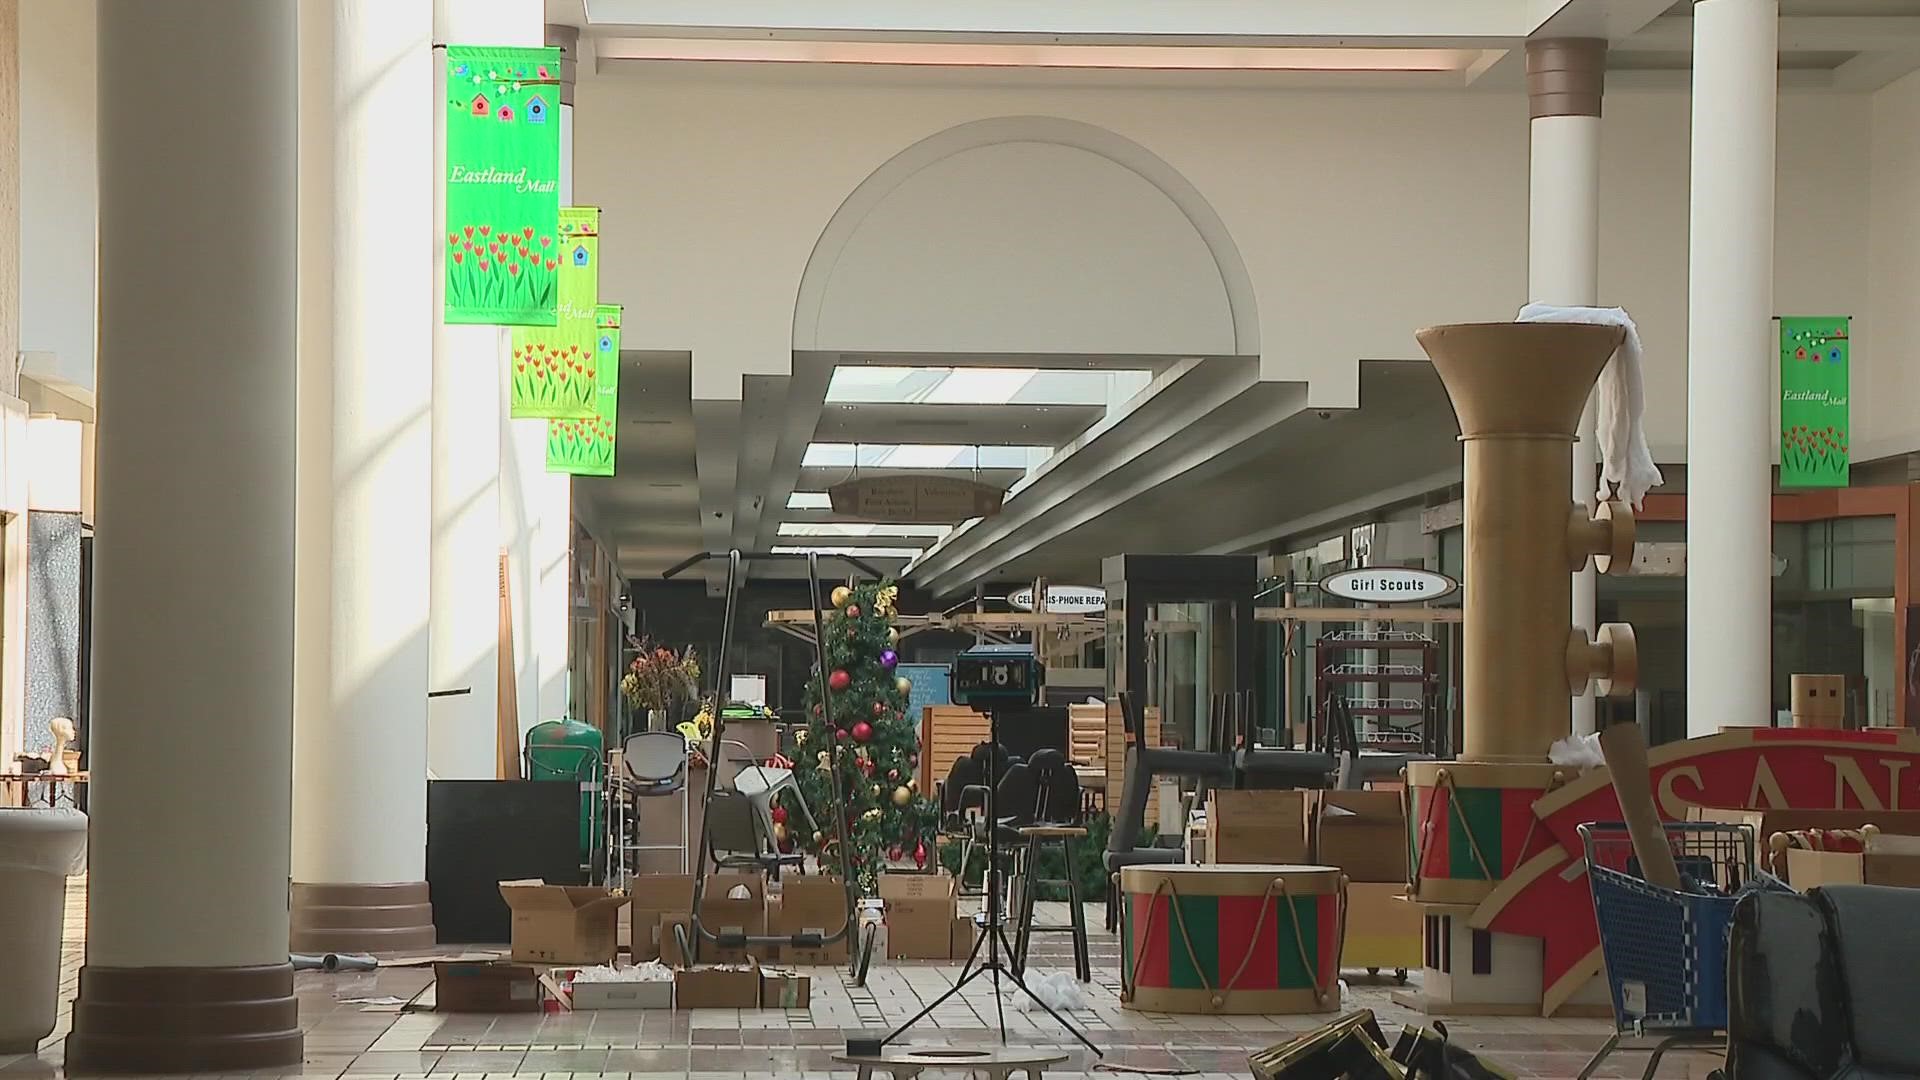 BGR Auctions is currently selling thousands of items found inside Eastland Mall for $1.